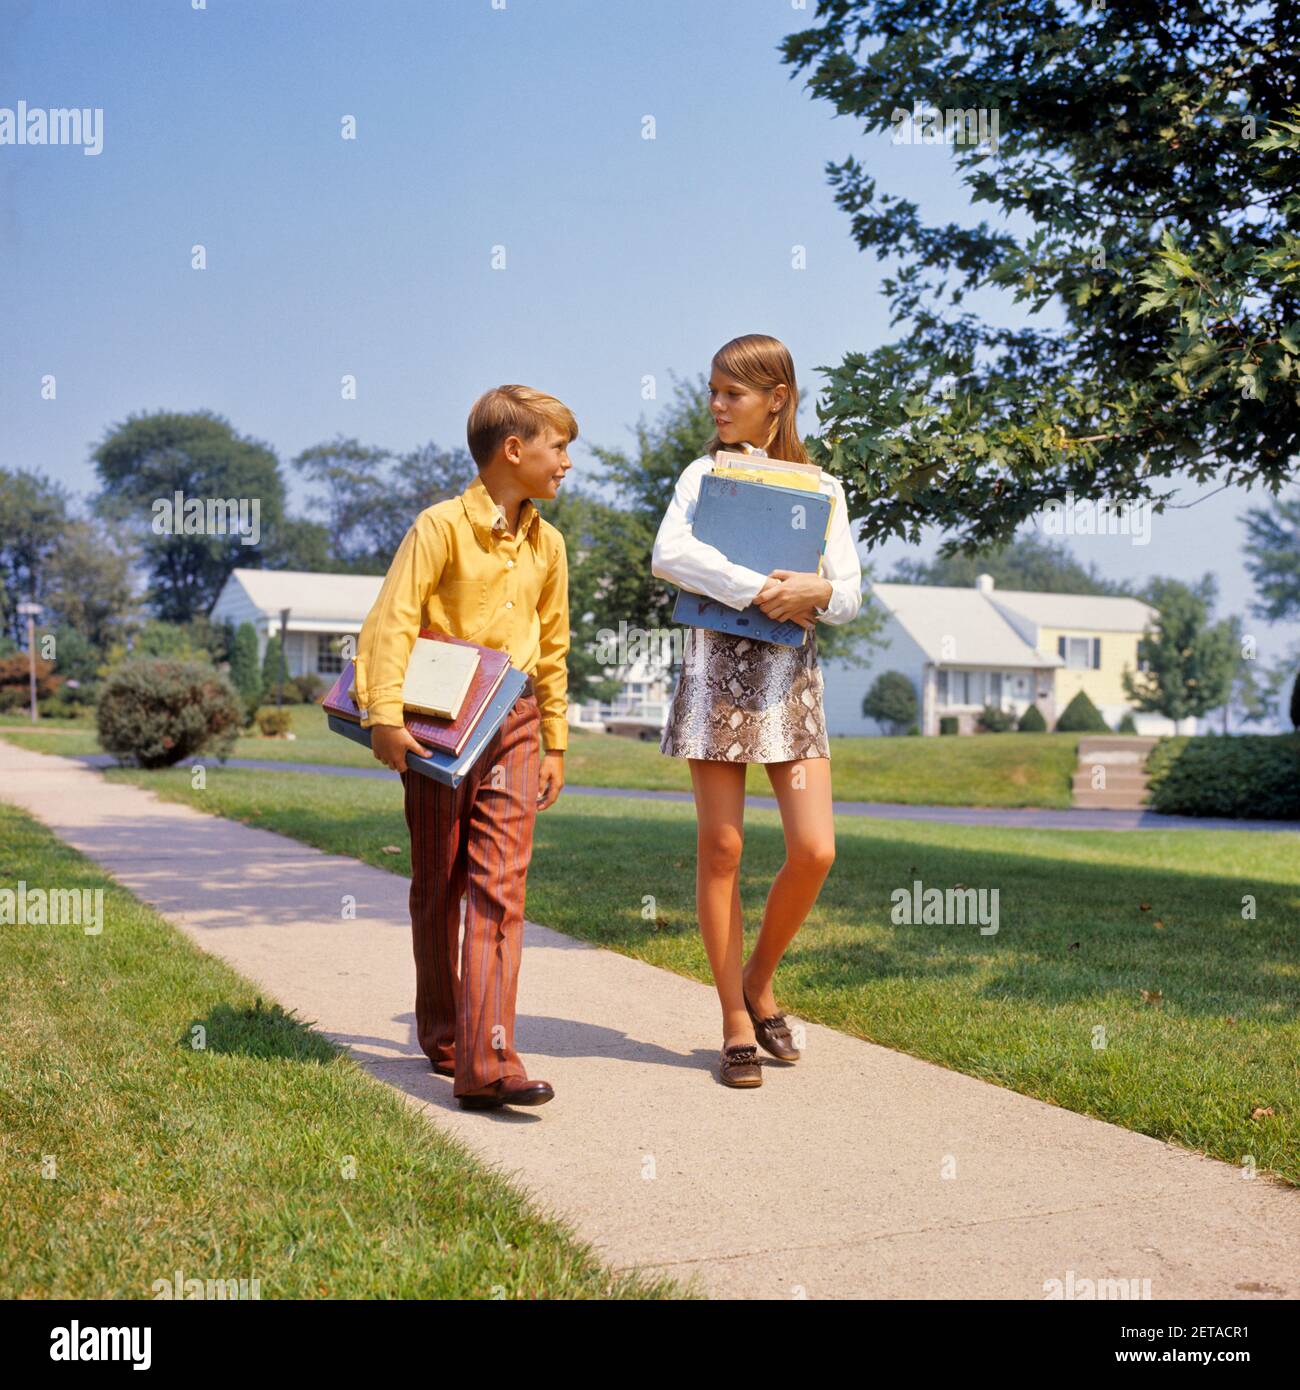 1960s 1970s BOY GIRL ON SIDEWALK WALKING HOME FROM OR TO SCHOOL TALKING CARRYING BOOKS GIRL WEARING FAUX SNAKESKIN MINI SKIRT - ks7526 HAR001 HARS 1 JUVENILE ELEMENTARY STYLE COMMUNICATION FRIEND MINI JOY LIFESTYLE FEMALES HOUSES BROTHERS HEALTHINESS HOME LIFE COPY SPACE FRIENDSHIP FULL-LENGTH RESIDENTIAL MALES BUILDINGS SIBLINGS SISTERS SCHOOLS GRADE HAPPINESS NEIGHBORHOOD HOMES PRIMARY SIBLING CONNECTION FAUX FRIENDLY RESIDENCE STYLISH OR COOPERATION GRADE SCHOOL GROWTH JUVENILES MIDDLE SCHOOL MINISKIRT PRE-TEEN PRE-TEEN GIRL TOGETHERNESS CAUCASIAN ETHNICITY HAR001 OLD FASHIONED Stock Photo